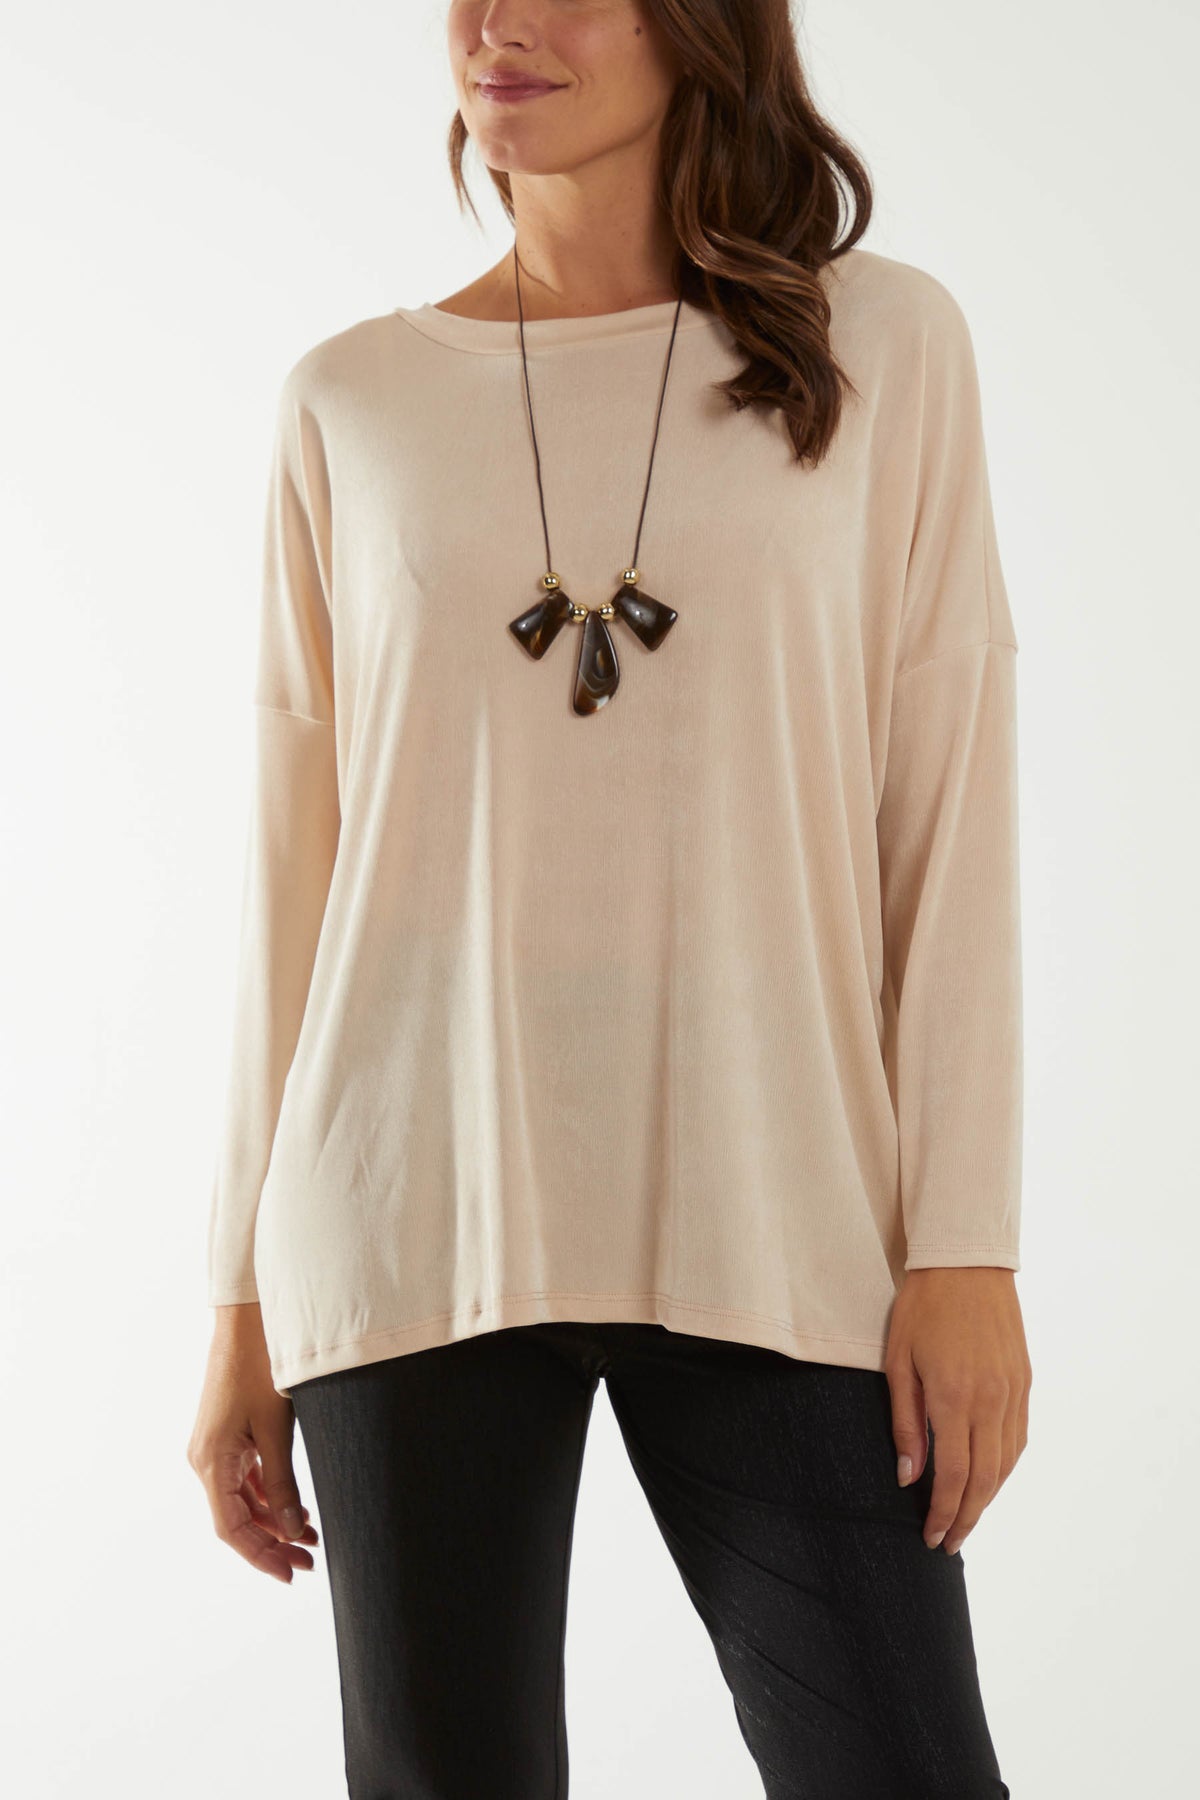 Straight Neck Acetate Necklace Top